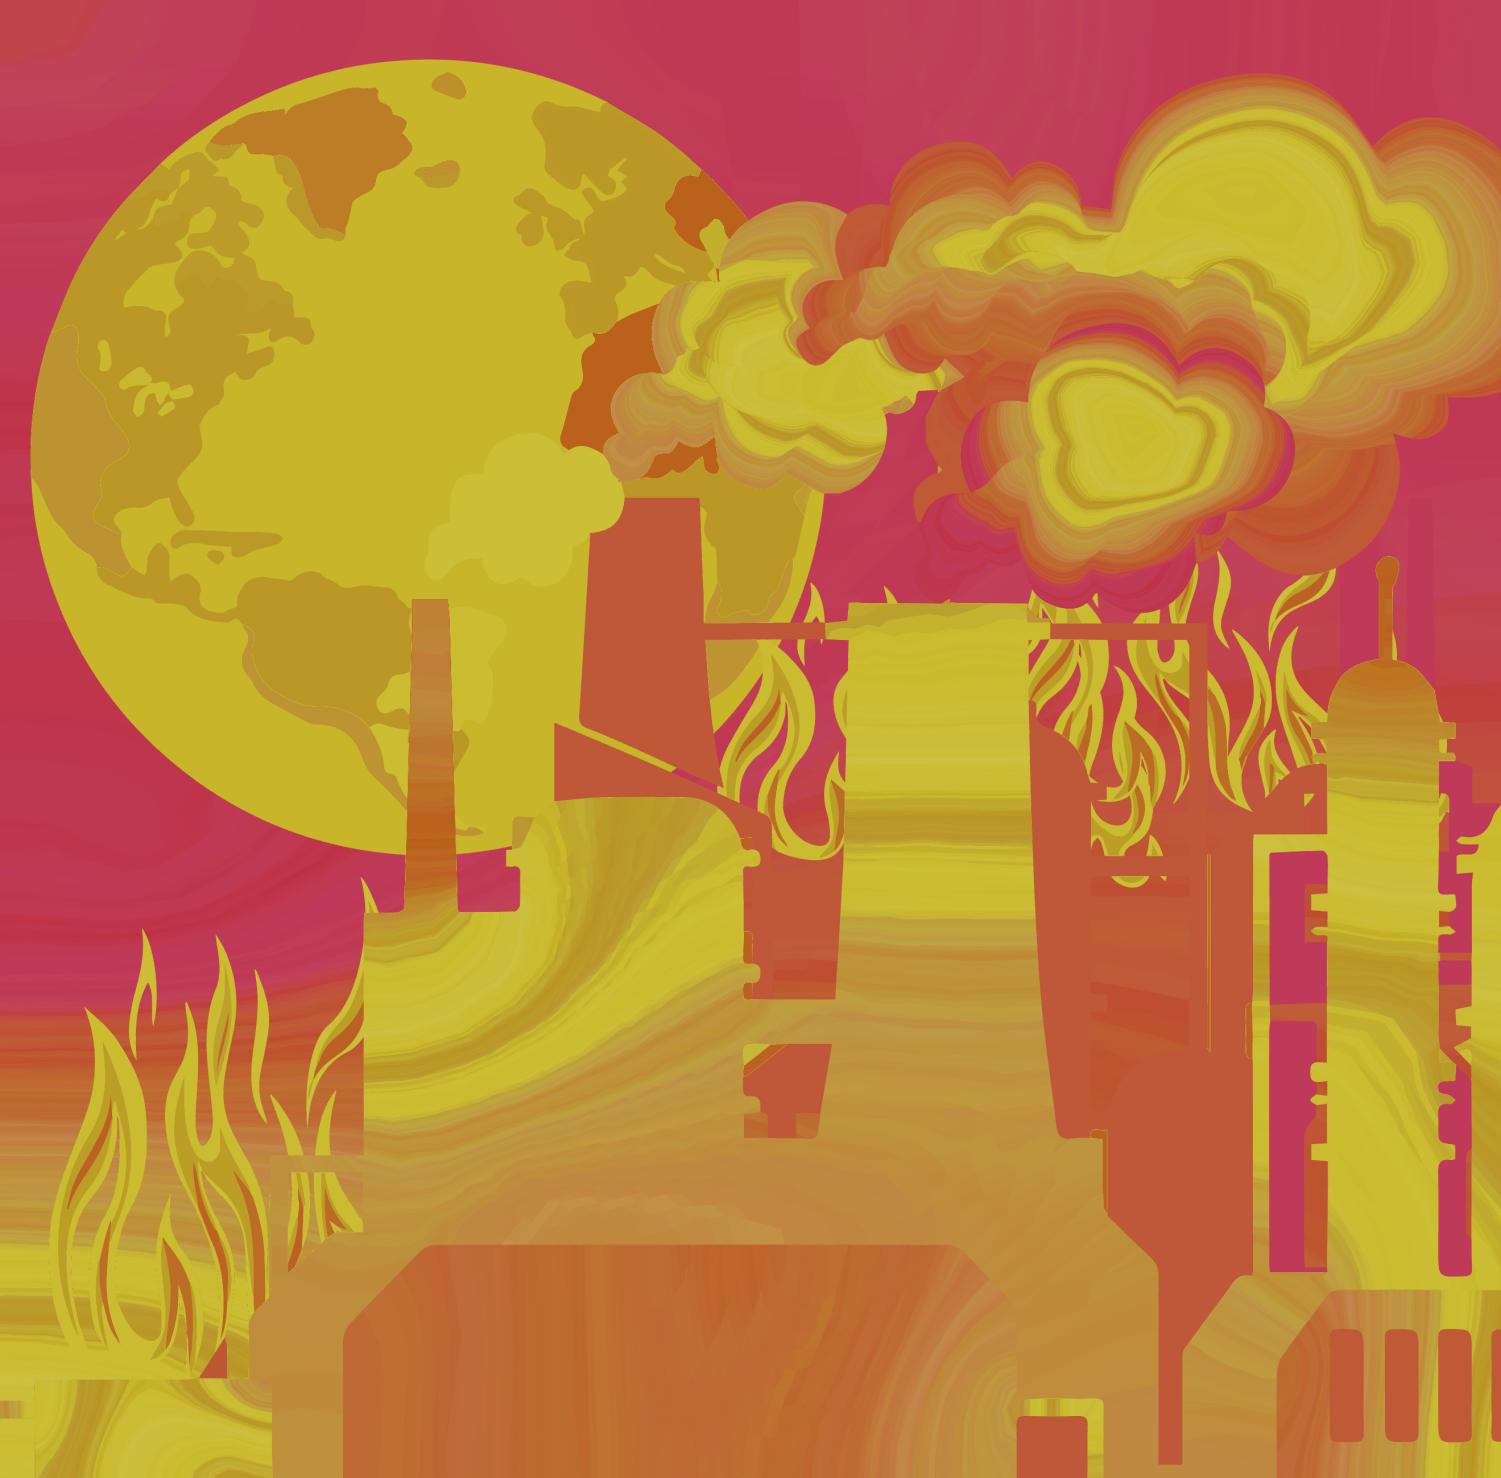 Artistic graphic of factories polluting the air, with flames in the back